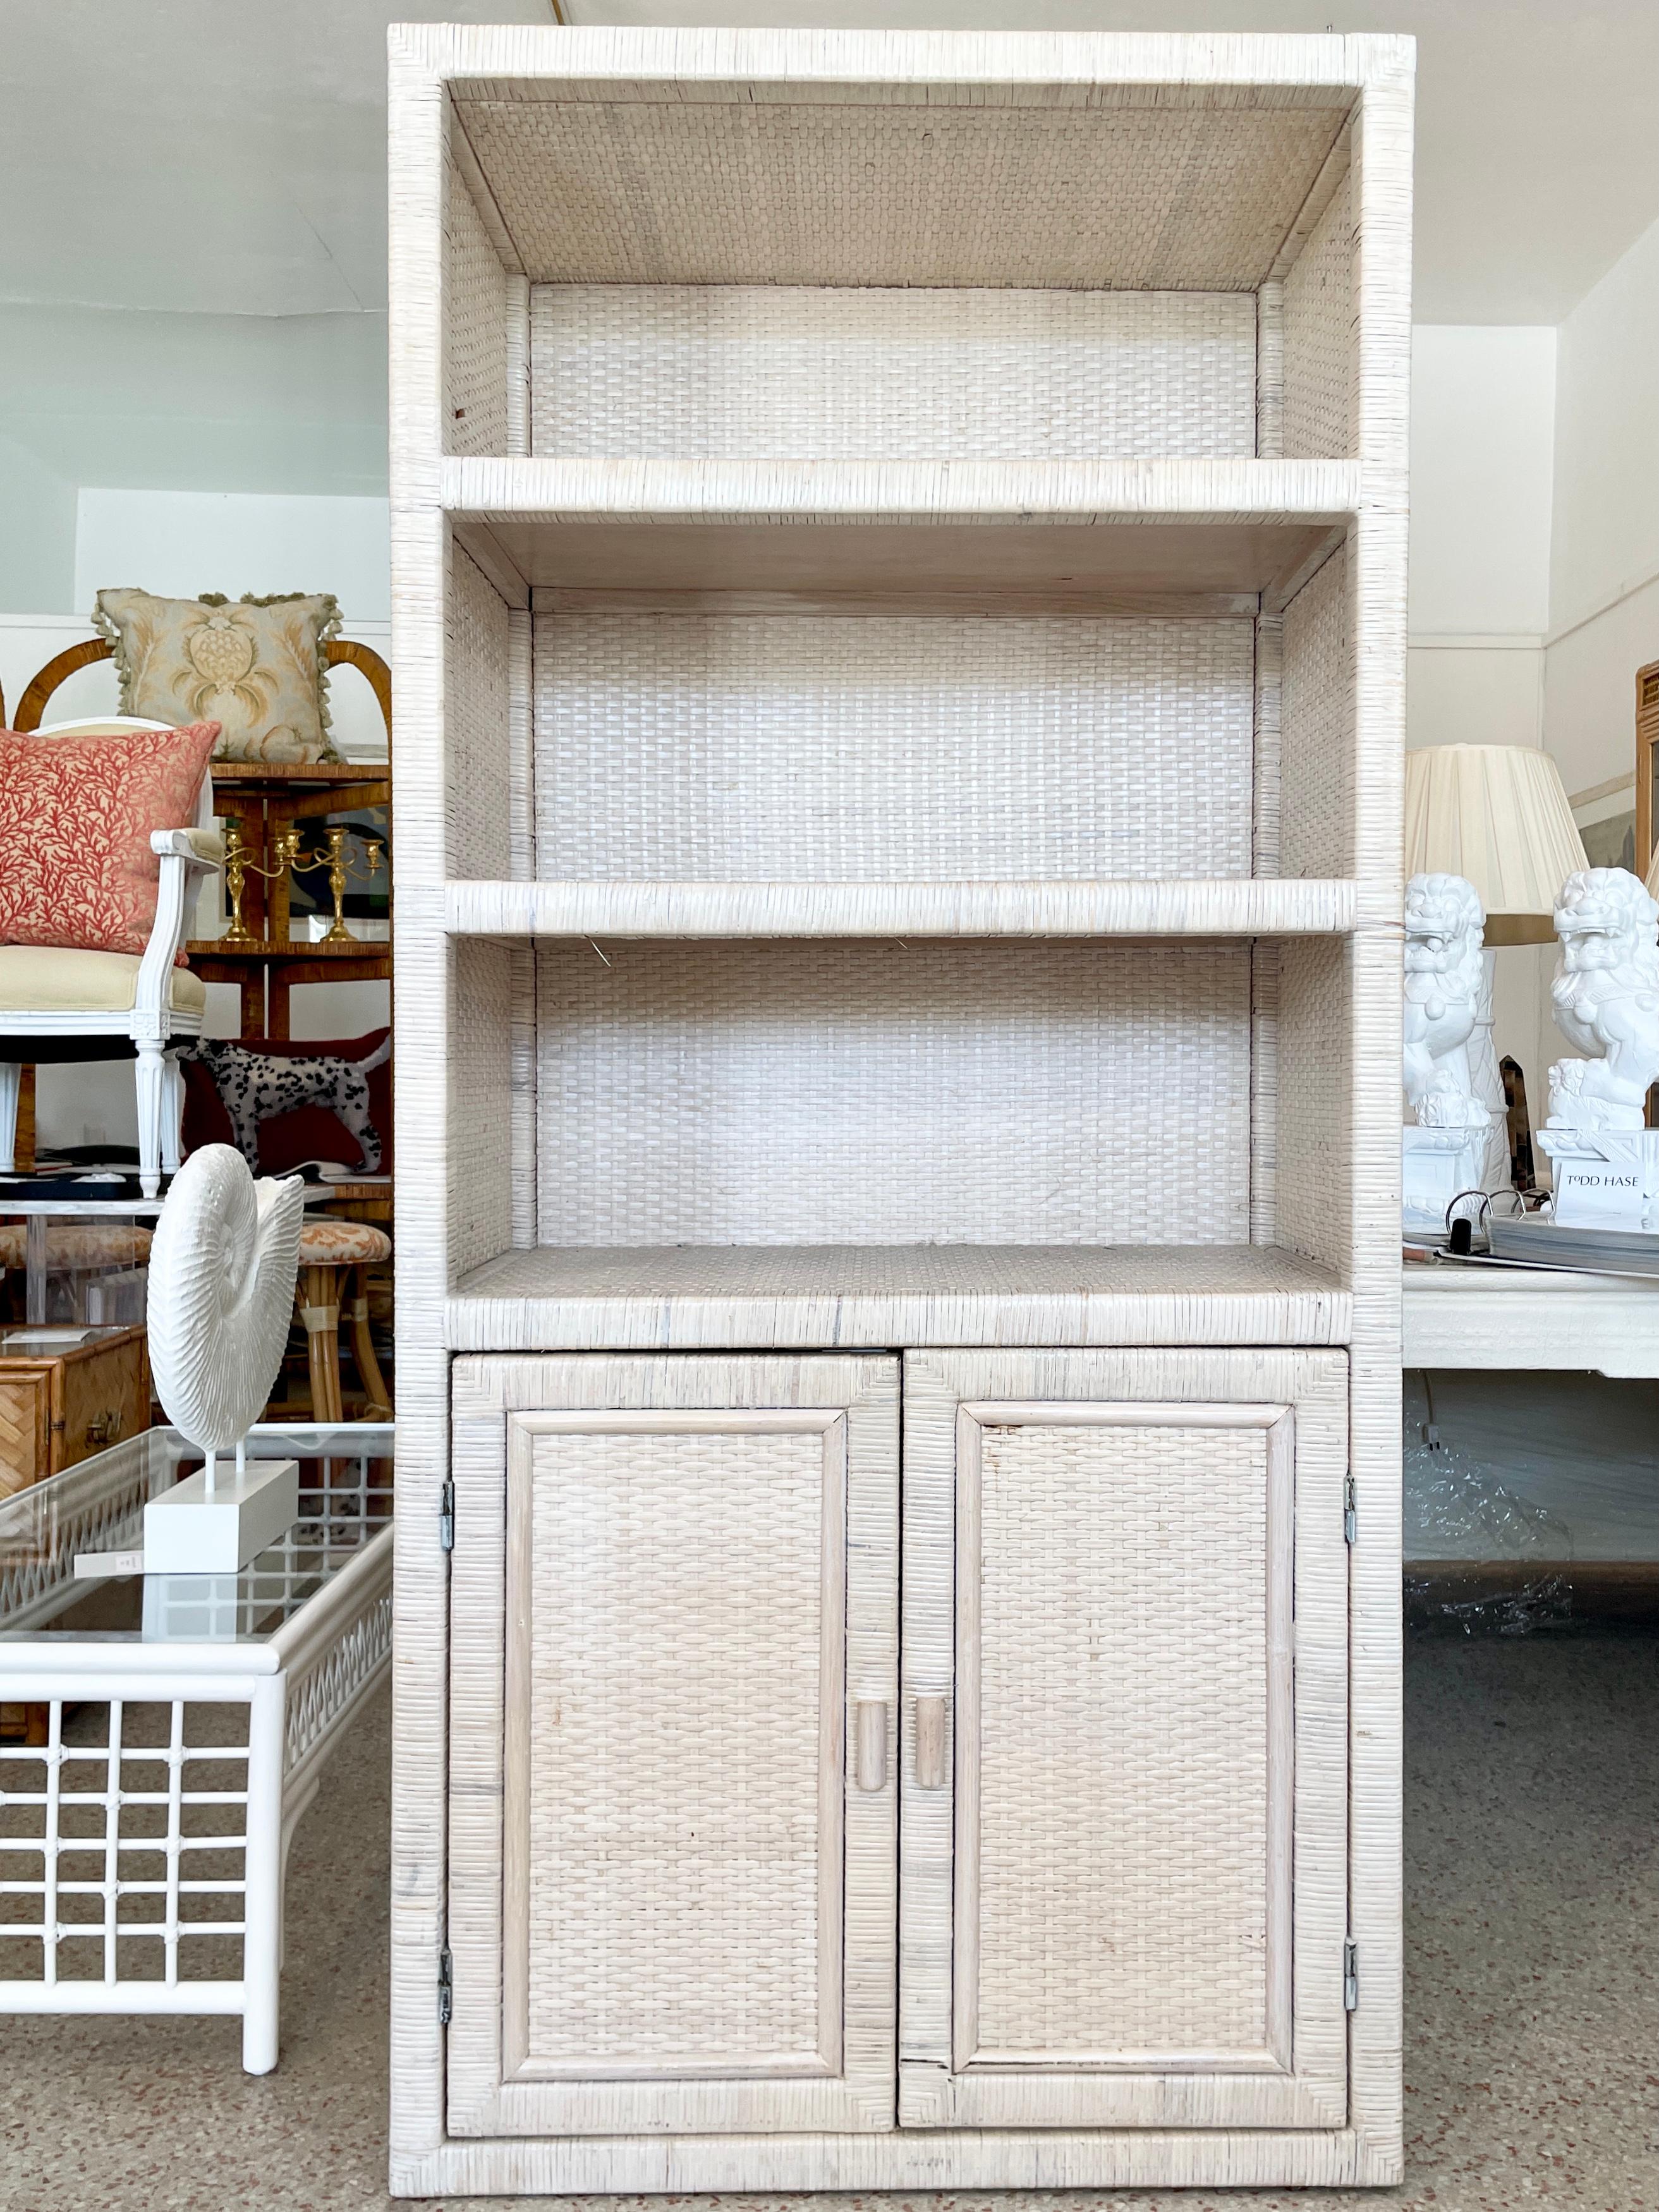 Rare Bielecky Brothers white washed boho chic rattan etagere with shelves and lower cabinet. Great addition to your boho chic inspired home. See our matching Bielecky Brothers who washed furniture in our listing!